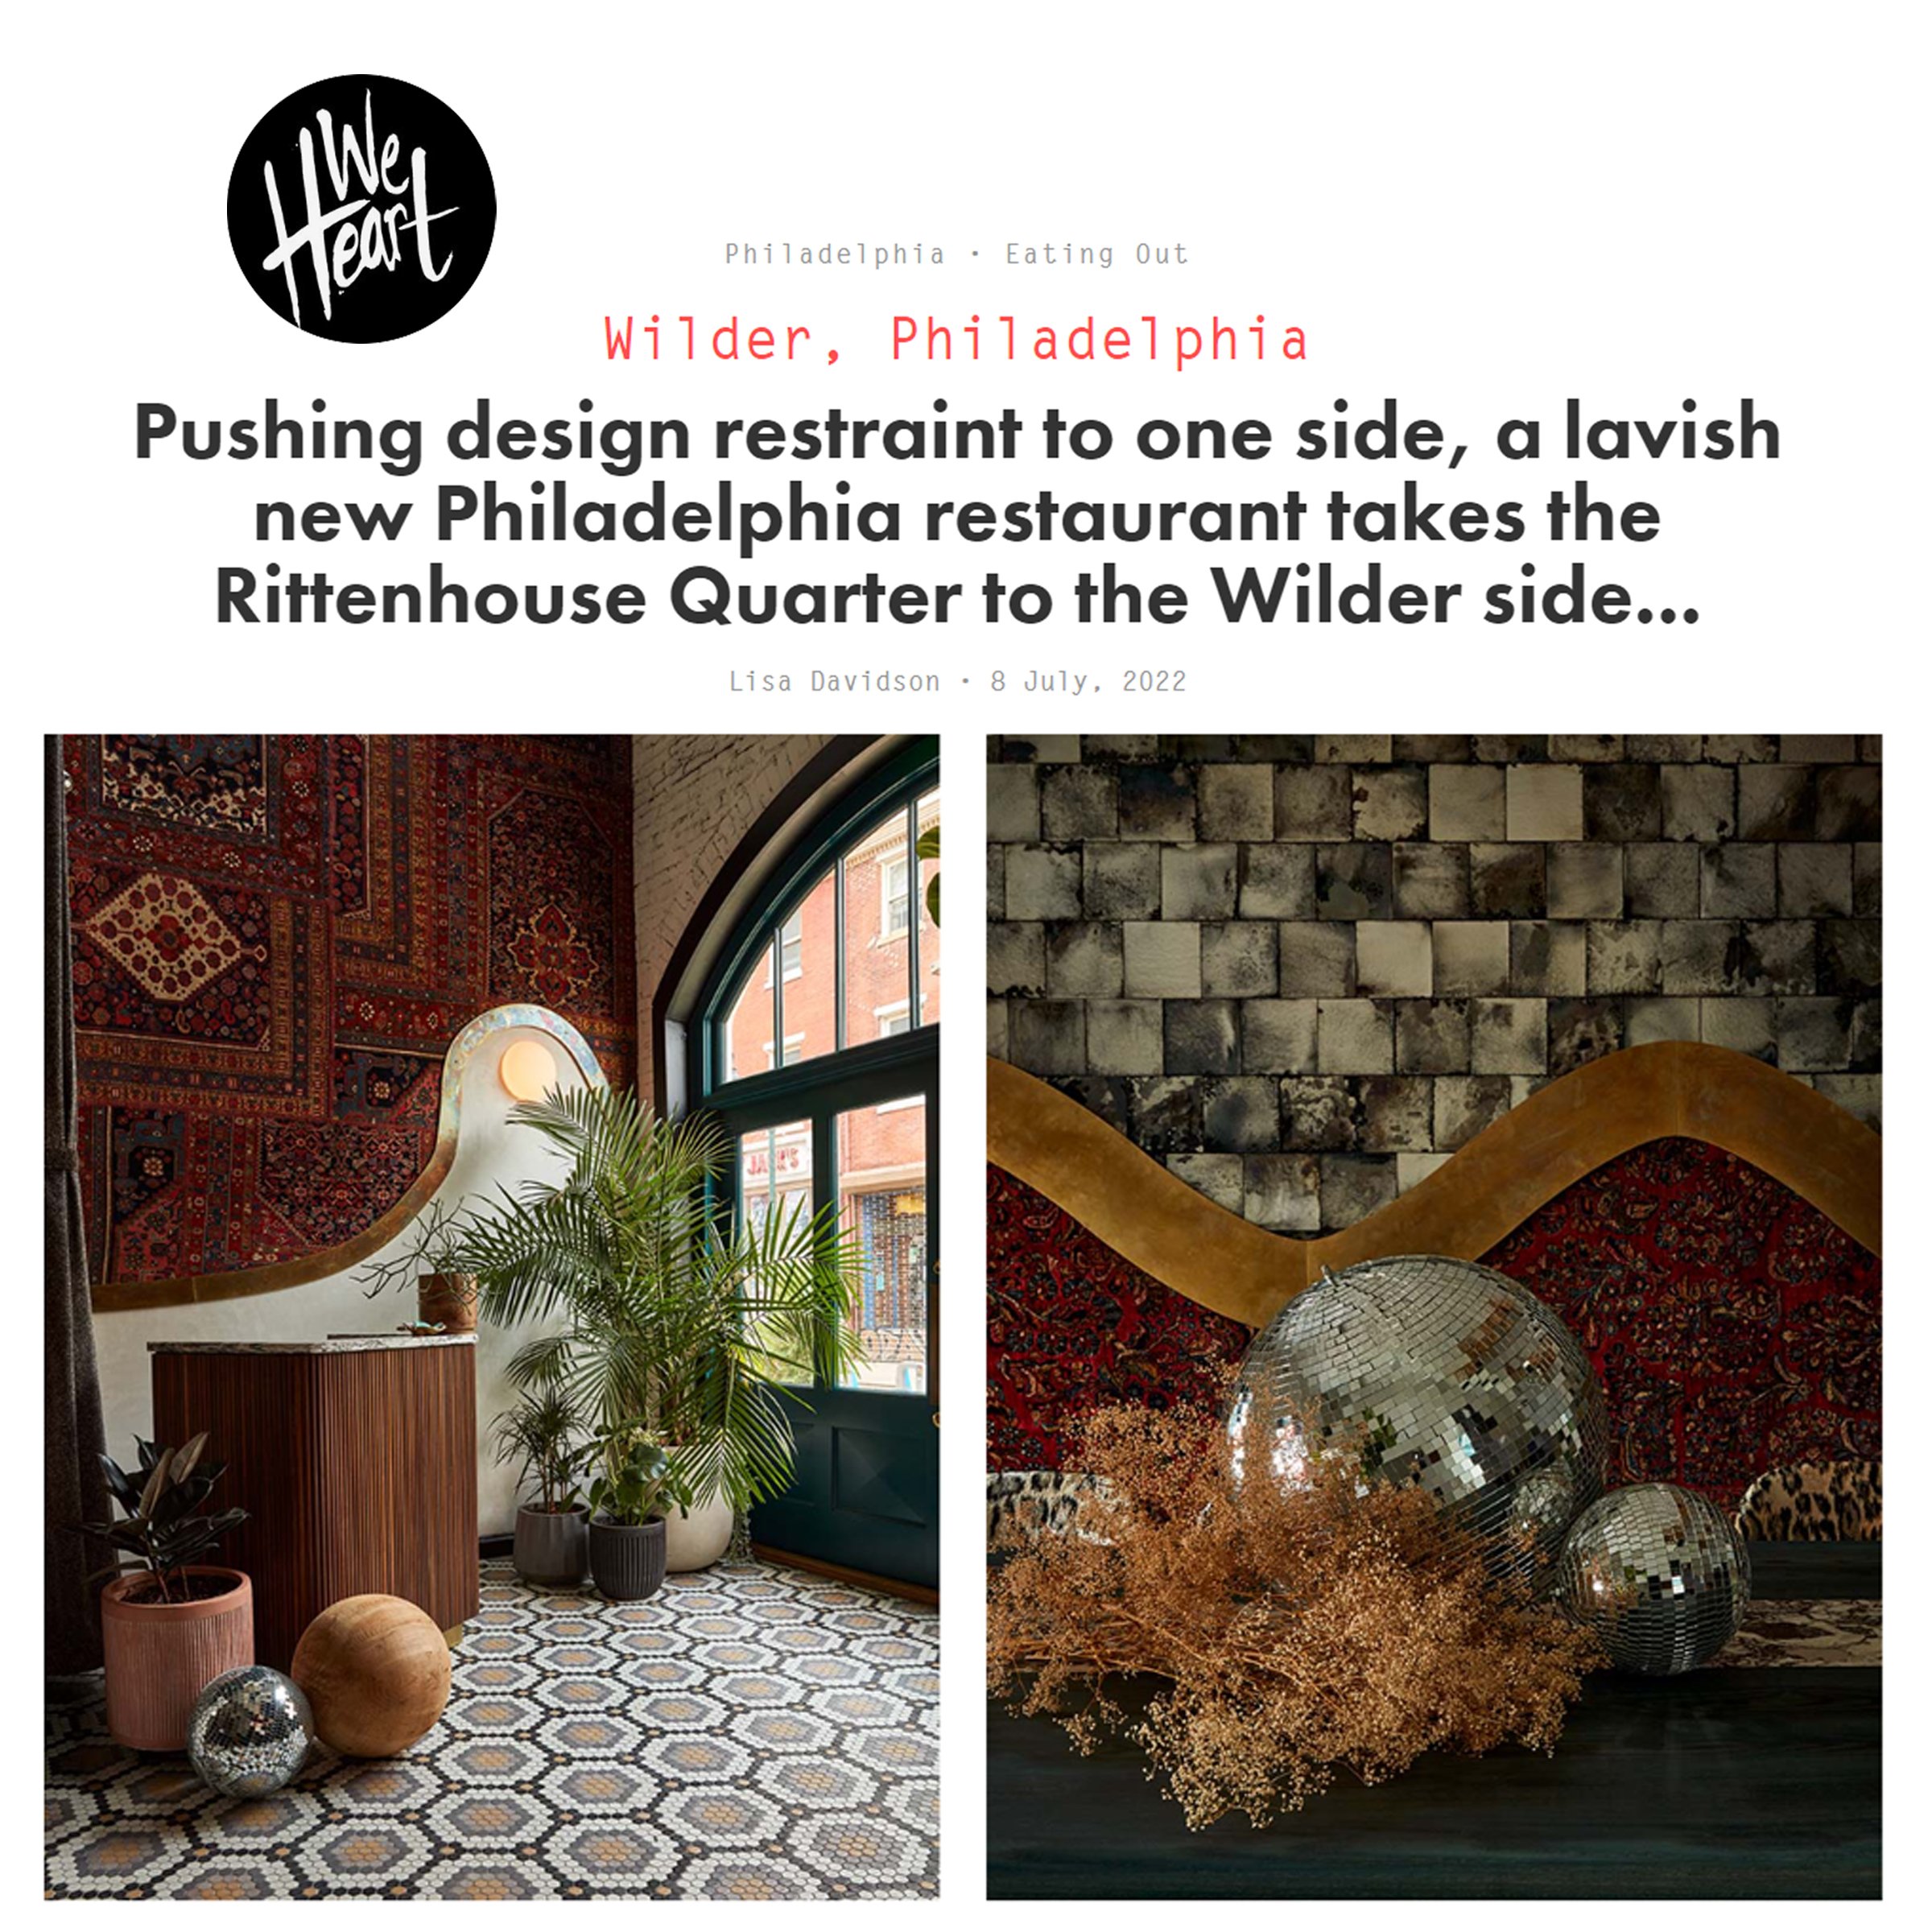 VELOCETTE STUDIO FEATURED IN WE HEART PUBLICATION